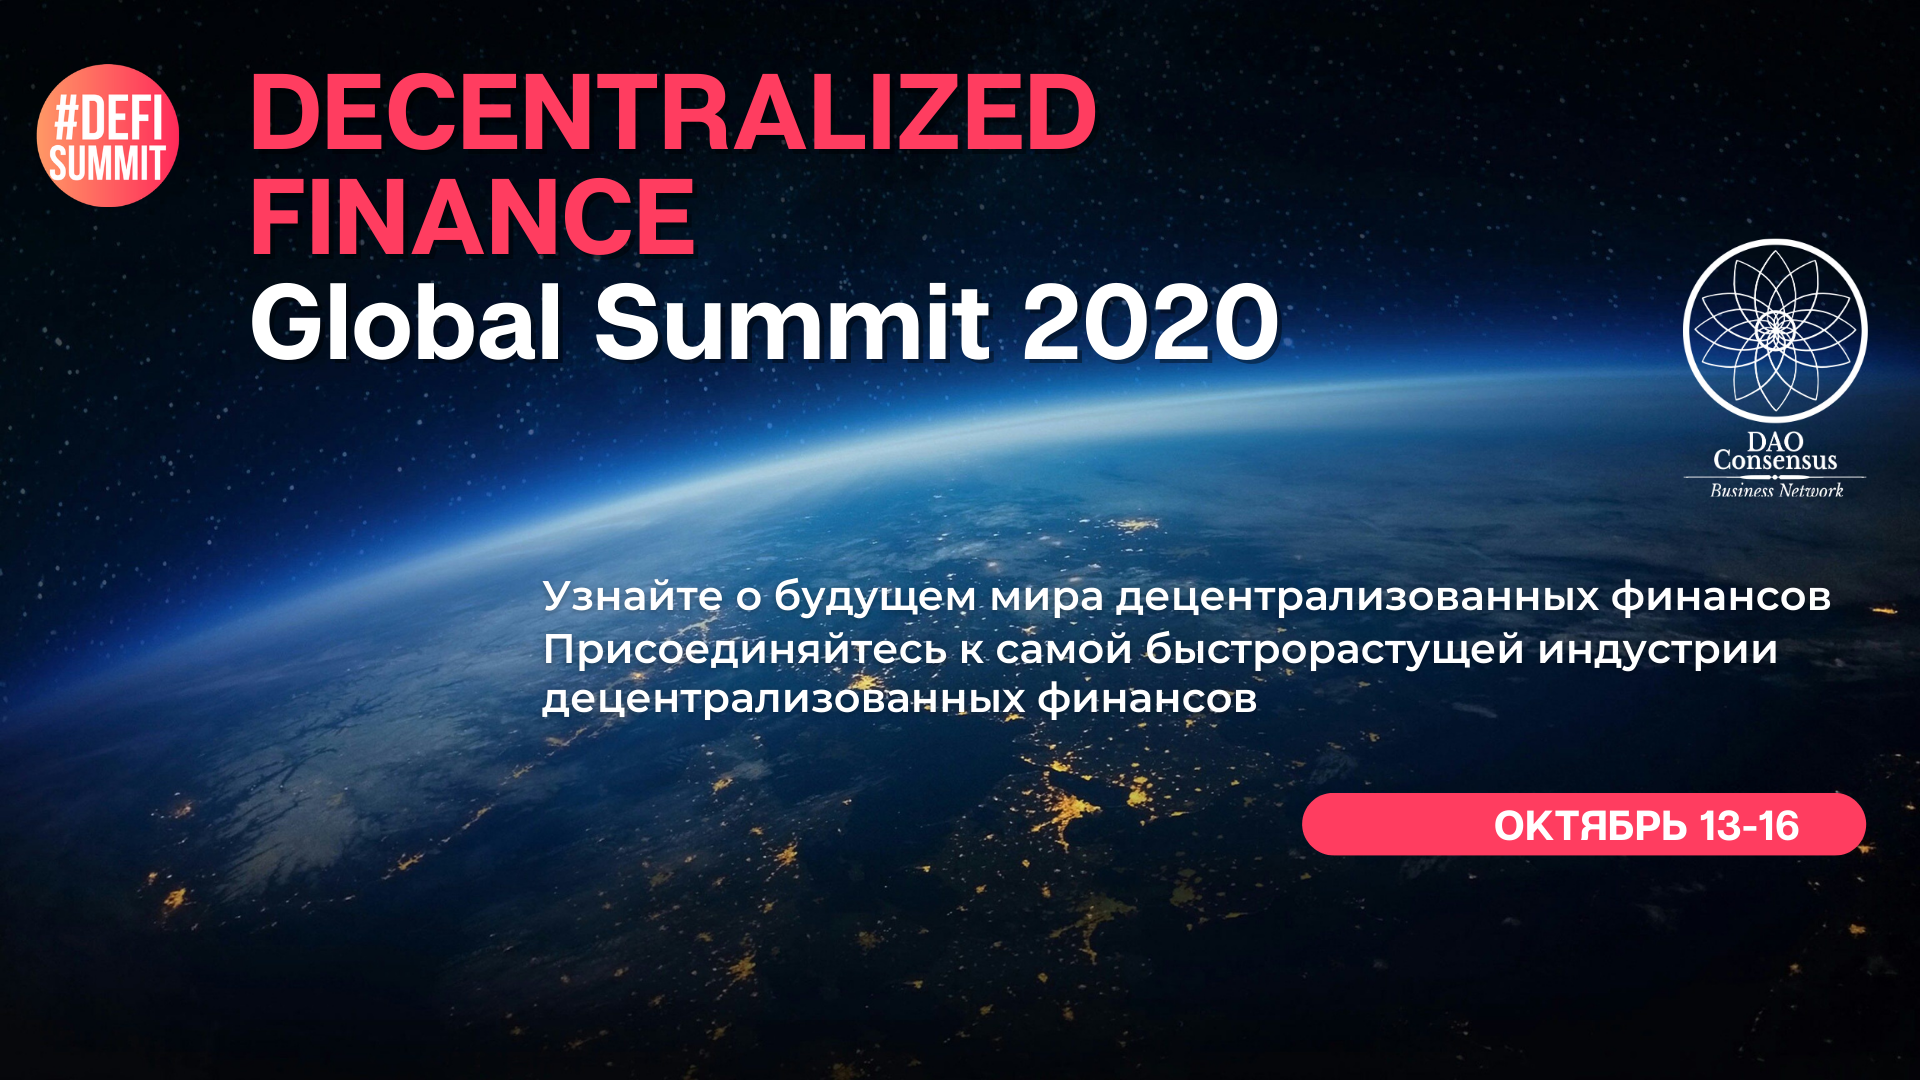 Decentralized Finance World Summit will take place from 13 to 16 October